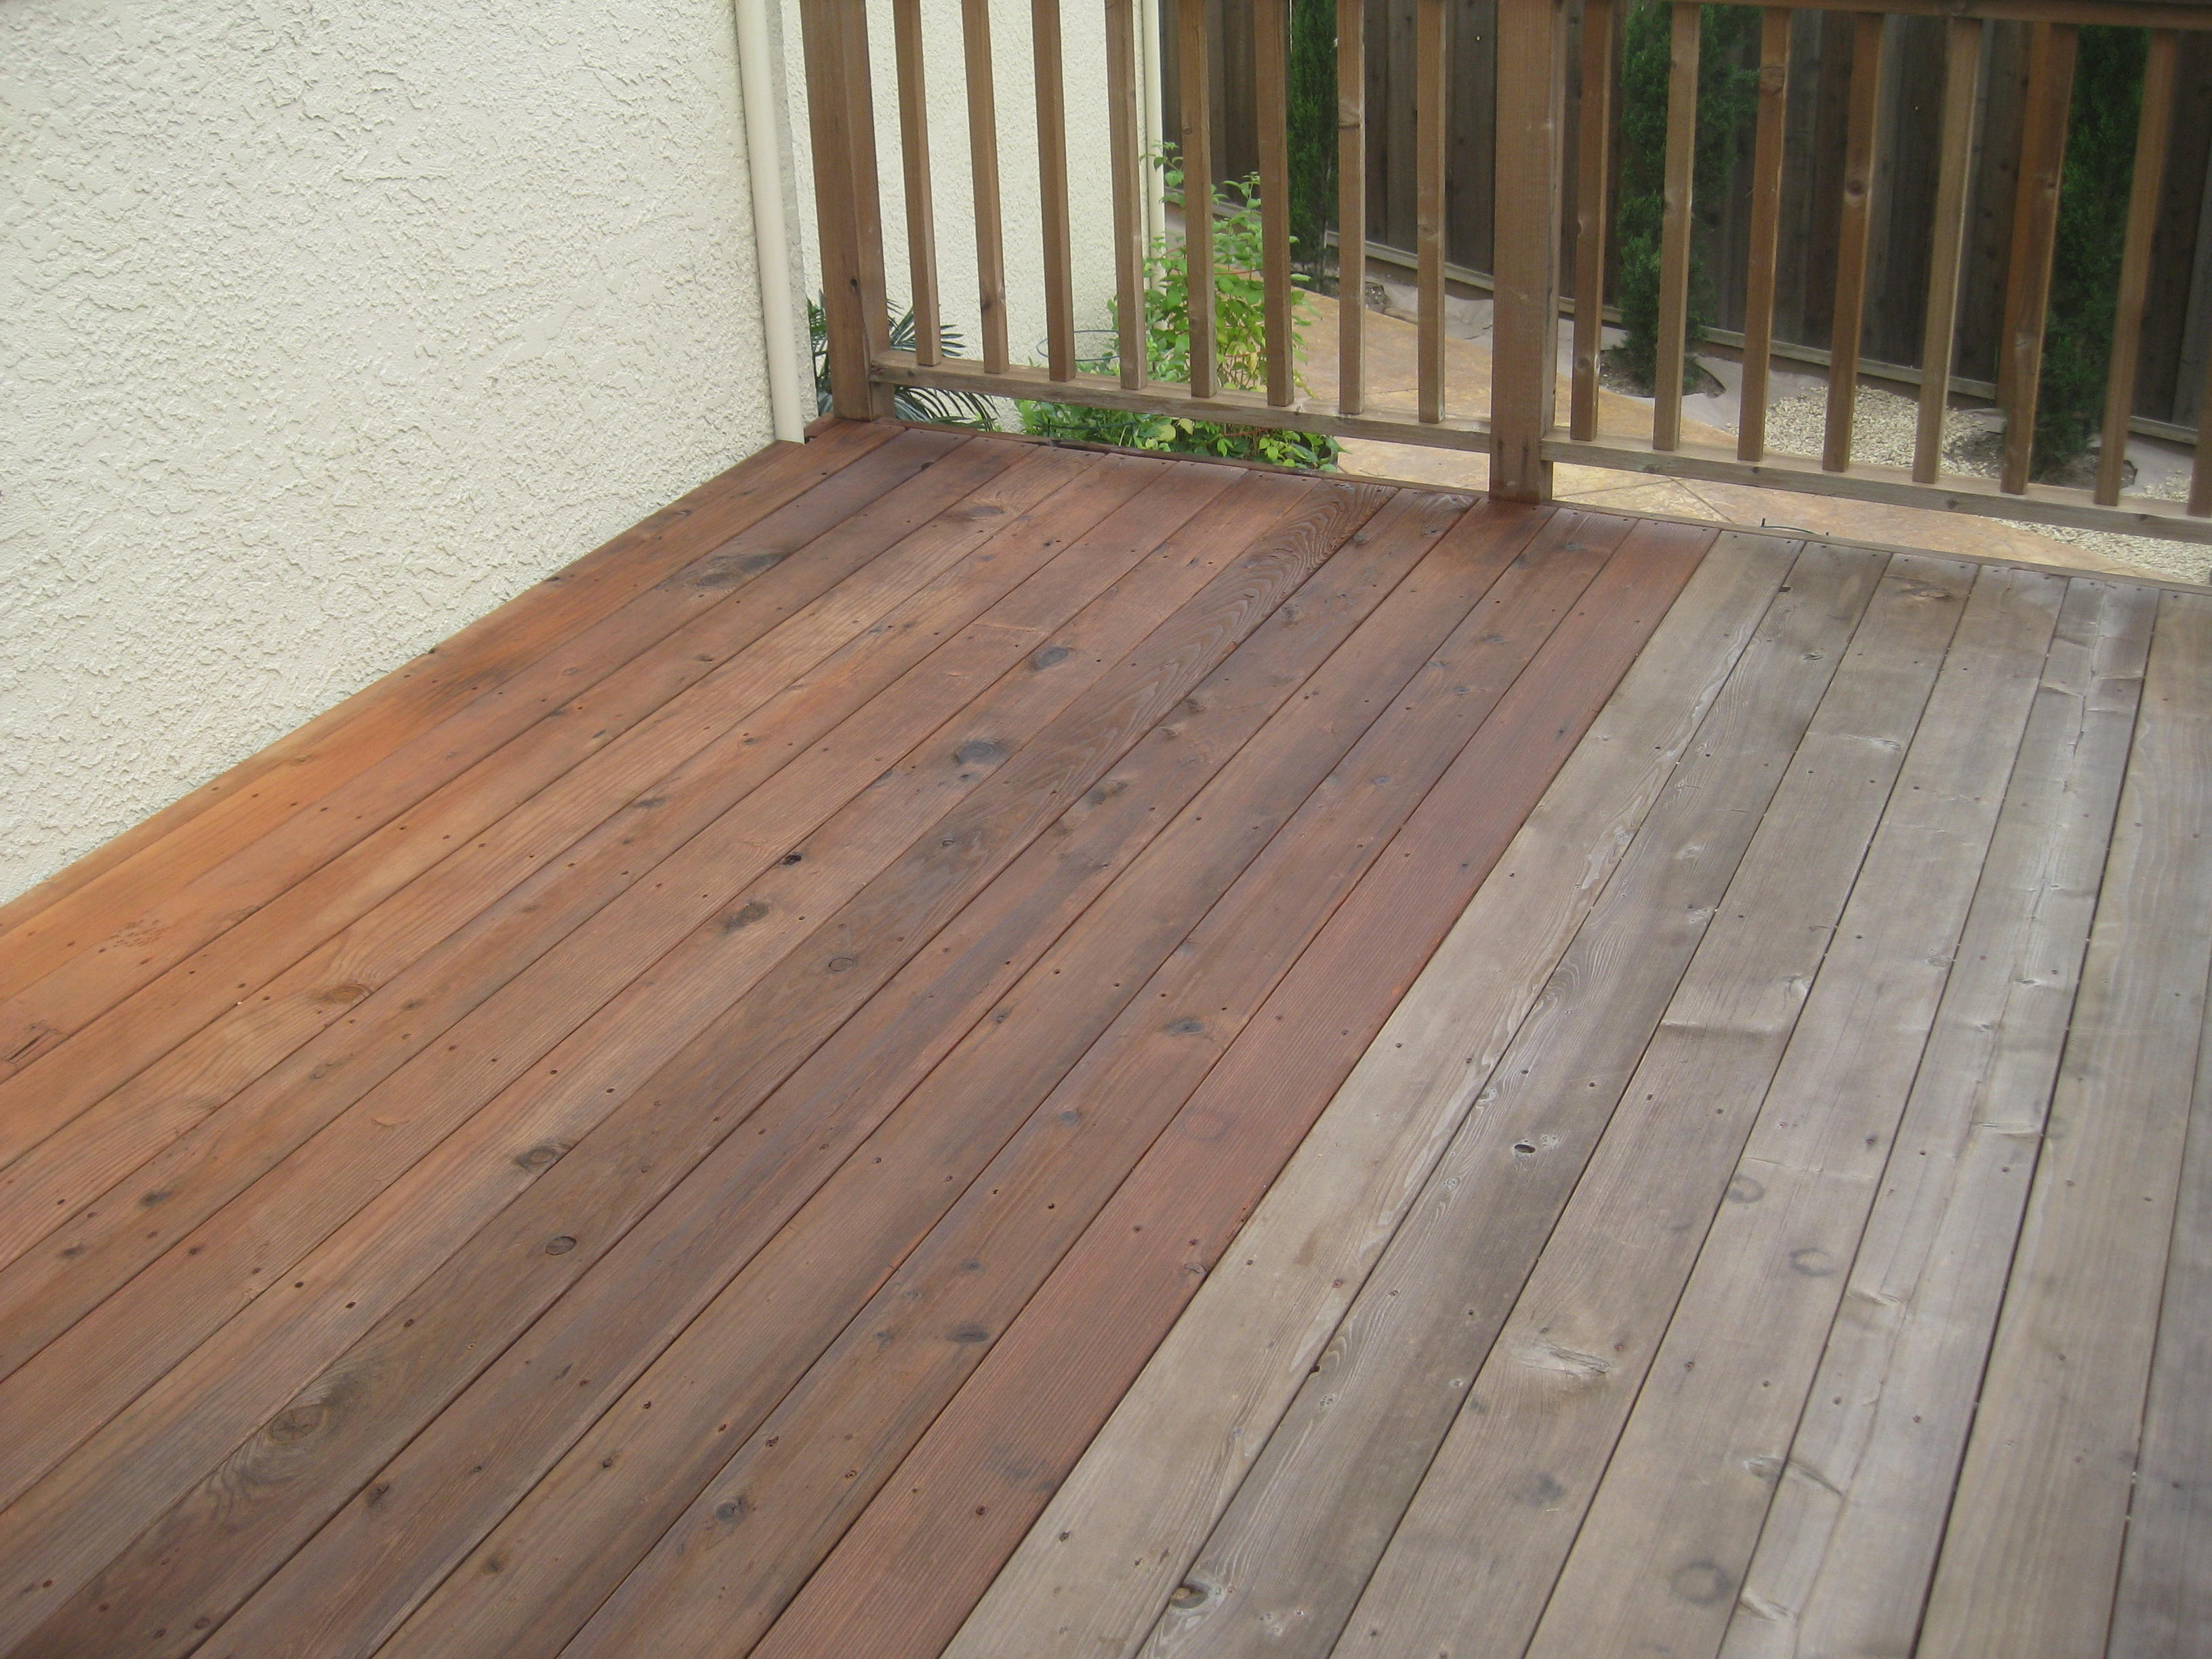 Best Stain For Old Deck Modern Solid Decks Ideas In 6 with regard to sizing 3264 X 2448